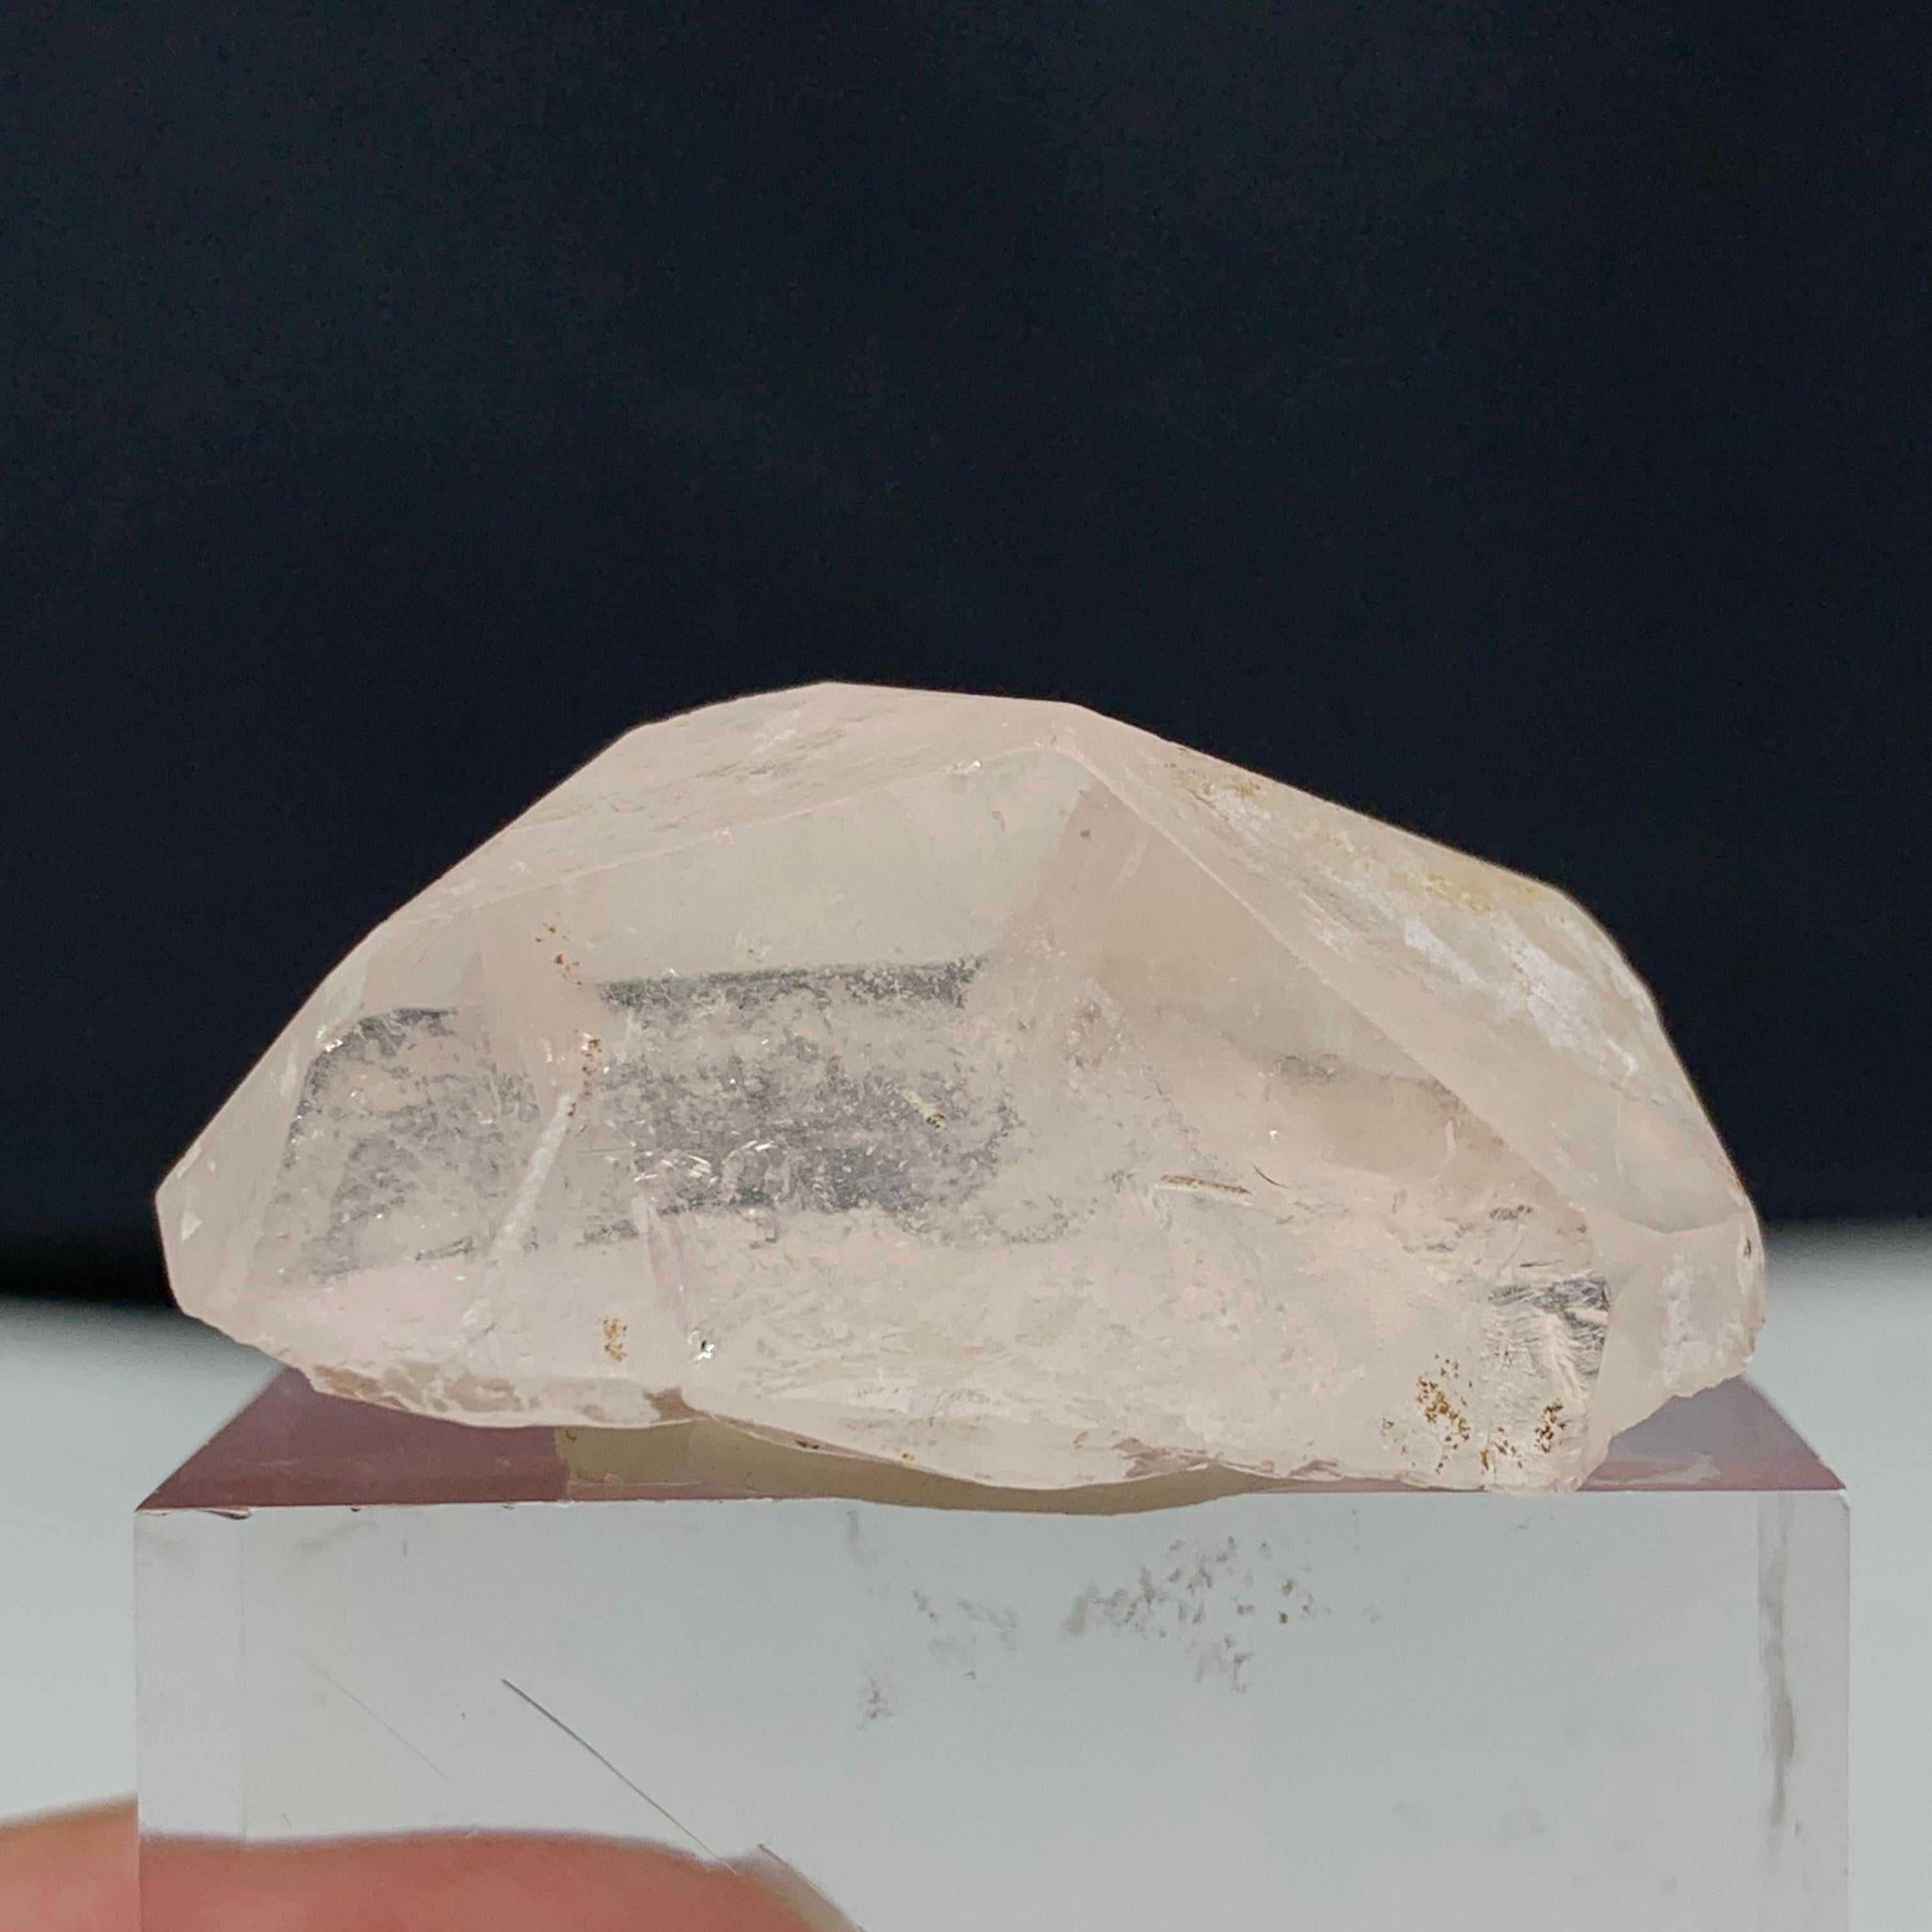 59.60 Carat Adorable Morganite Crystal From Kunar, Afghanistan 
Weight: 59.60 Carat 
Dimension: 1.5 x 3.7 x 1.8 Cm
Origin: Kunar, Afghanistan 

With its soft pinkish hue, morganite is often associated with innocence, sweetness, romance and love. In